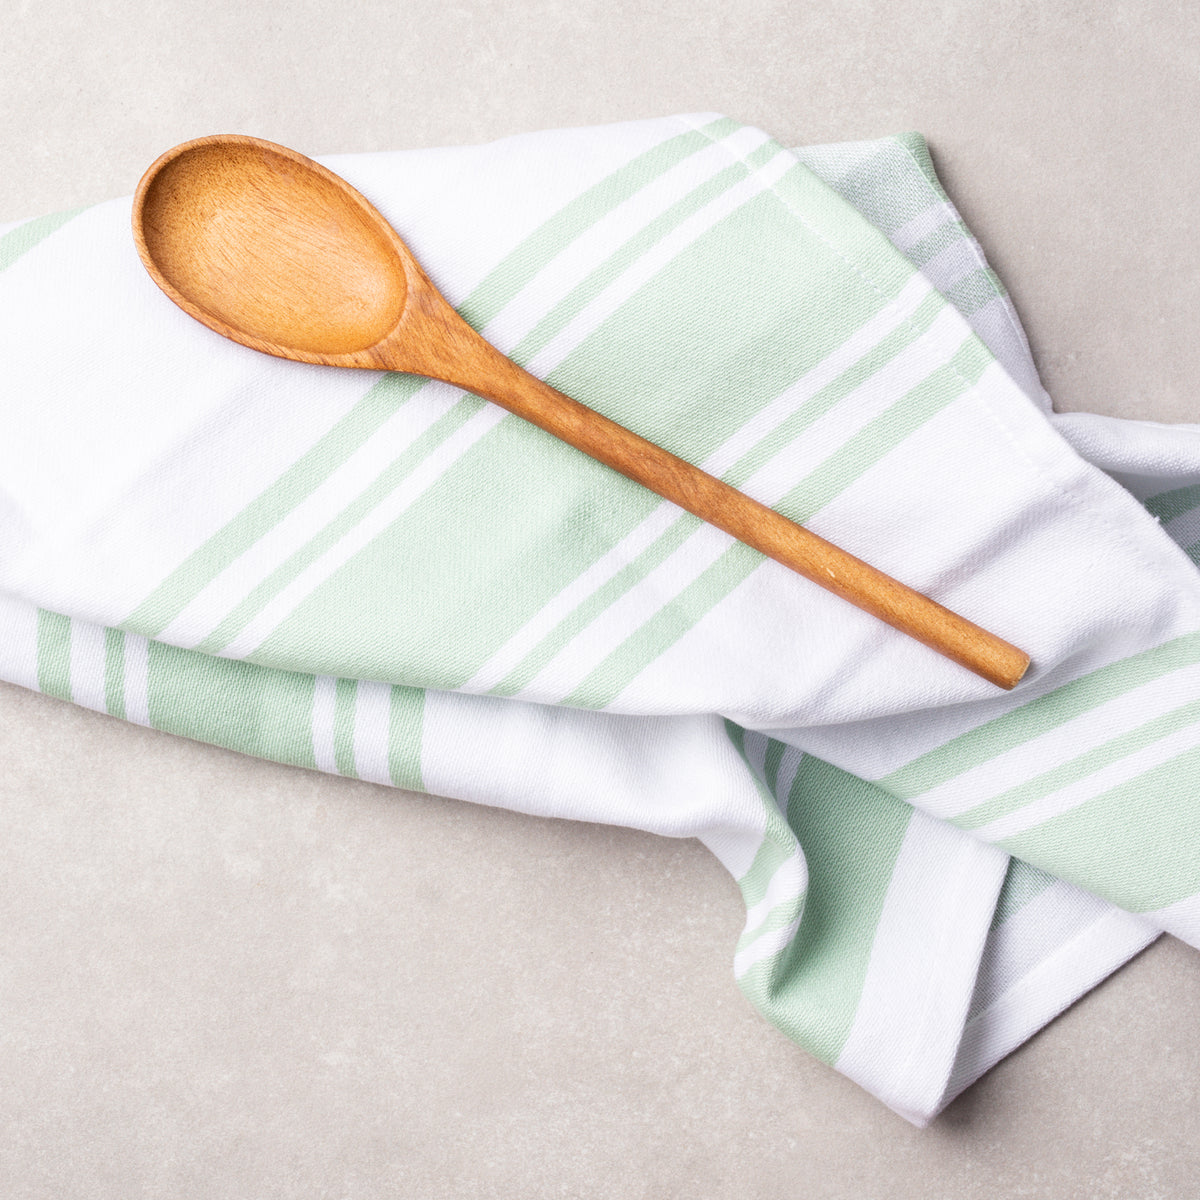 Delilah Home Sea Pines Kitchen Towels – Super Soft and Comfy Kitchen Cloth  Napkins Made from Organic Cotton Material for Drying, Wiping, or Cleaning –